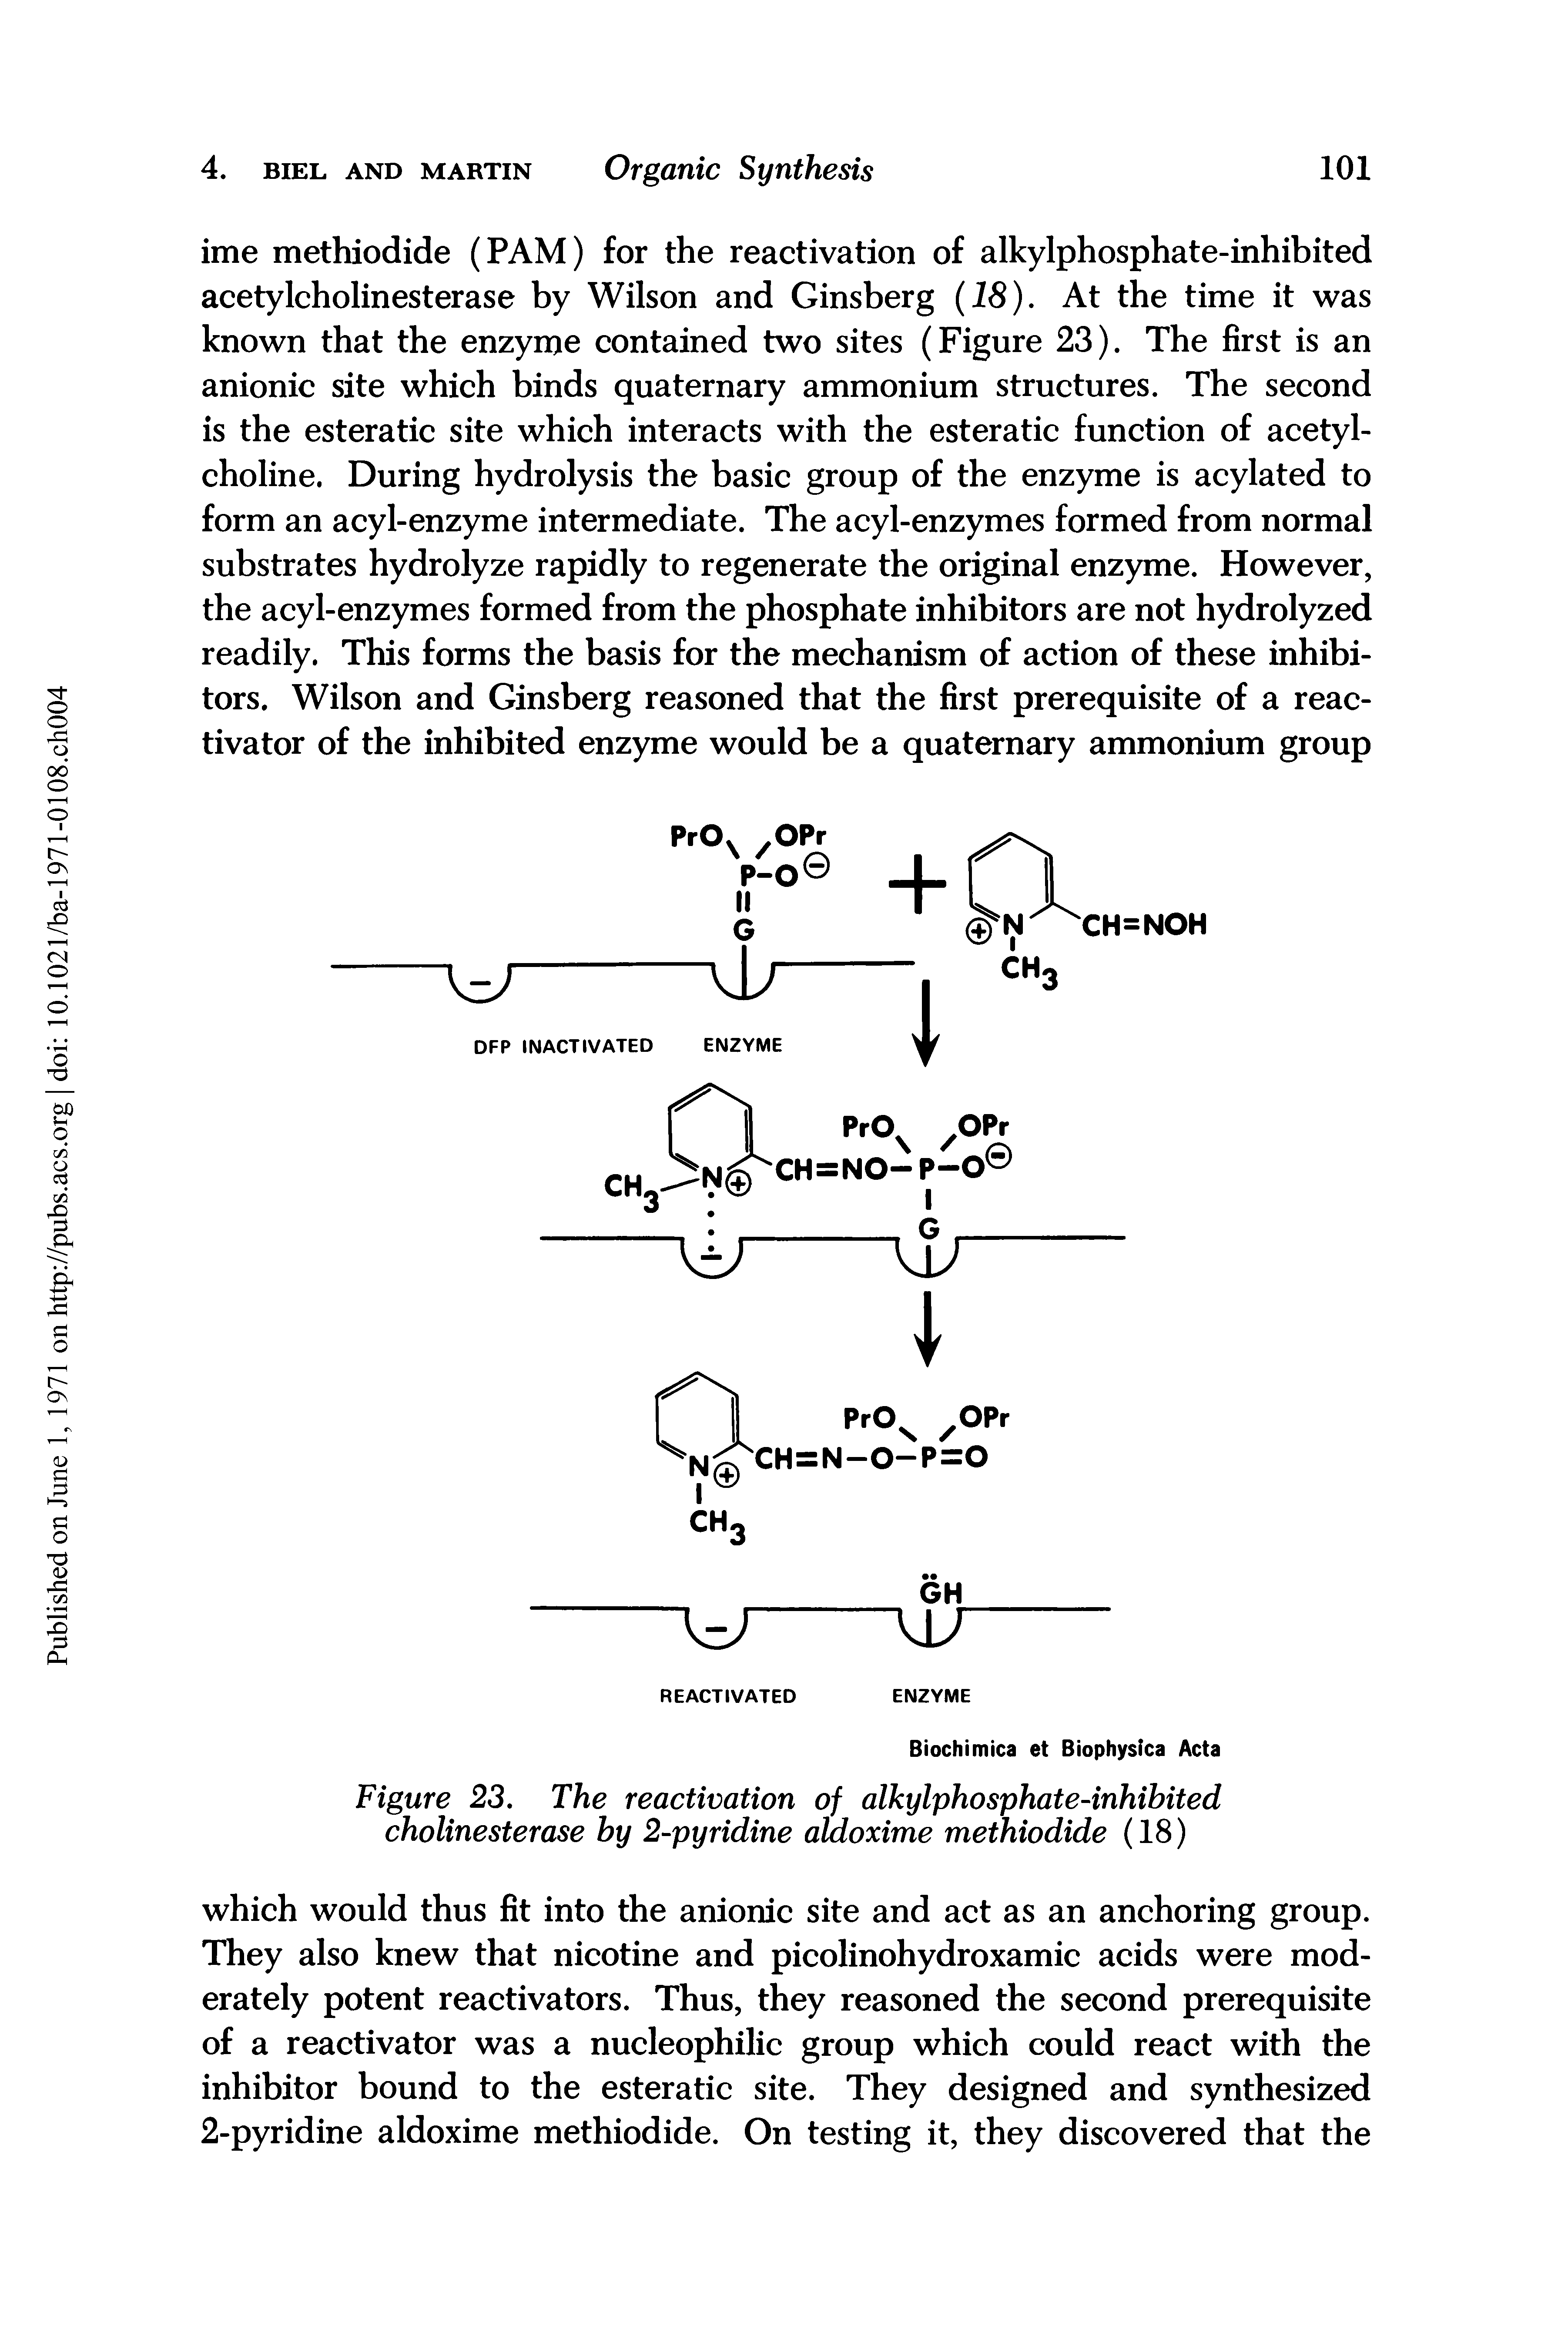 Figure 23. The reactivation of alkylphosphate-inhibited cholinesterase by 2-pyridine aldoxime methiodide (18)...